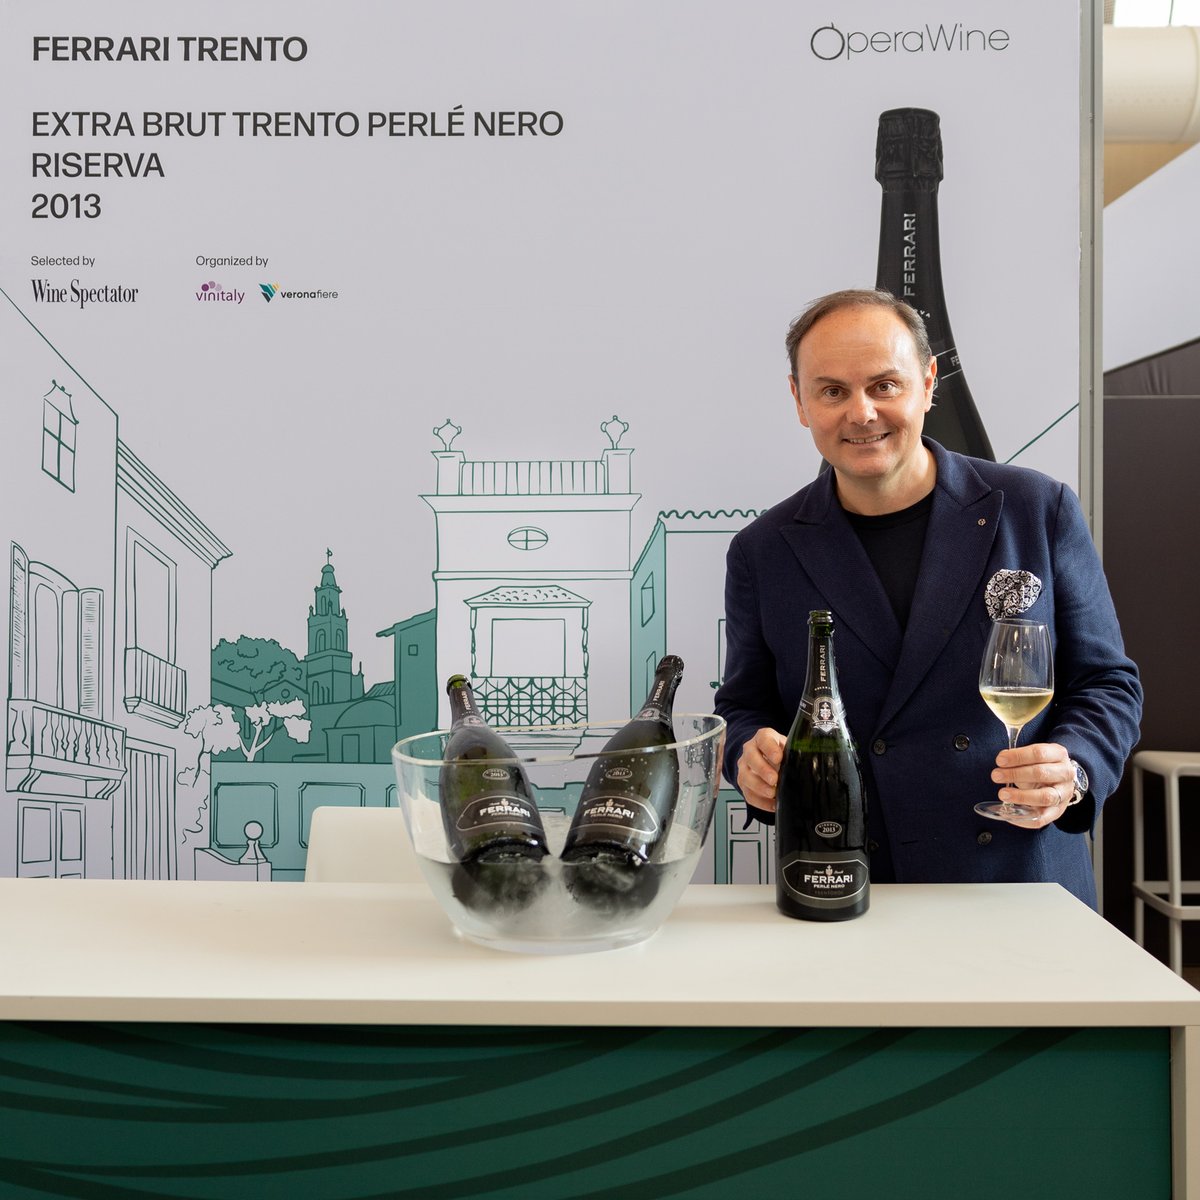 Here is the portrait of @FerrariTrento, one of the great Italian producers selected by Wine Spectator for #OperaWine2024. During this year's Grand Tasting, they shared with guests their Extra Brut Trento Perlé Nero Riserva 2013. Congratulations! #Vinitaly2024 #finestitalianwines